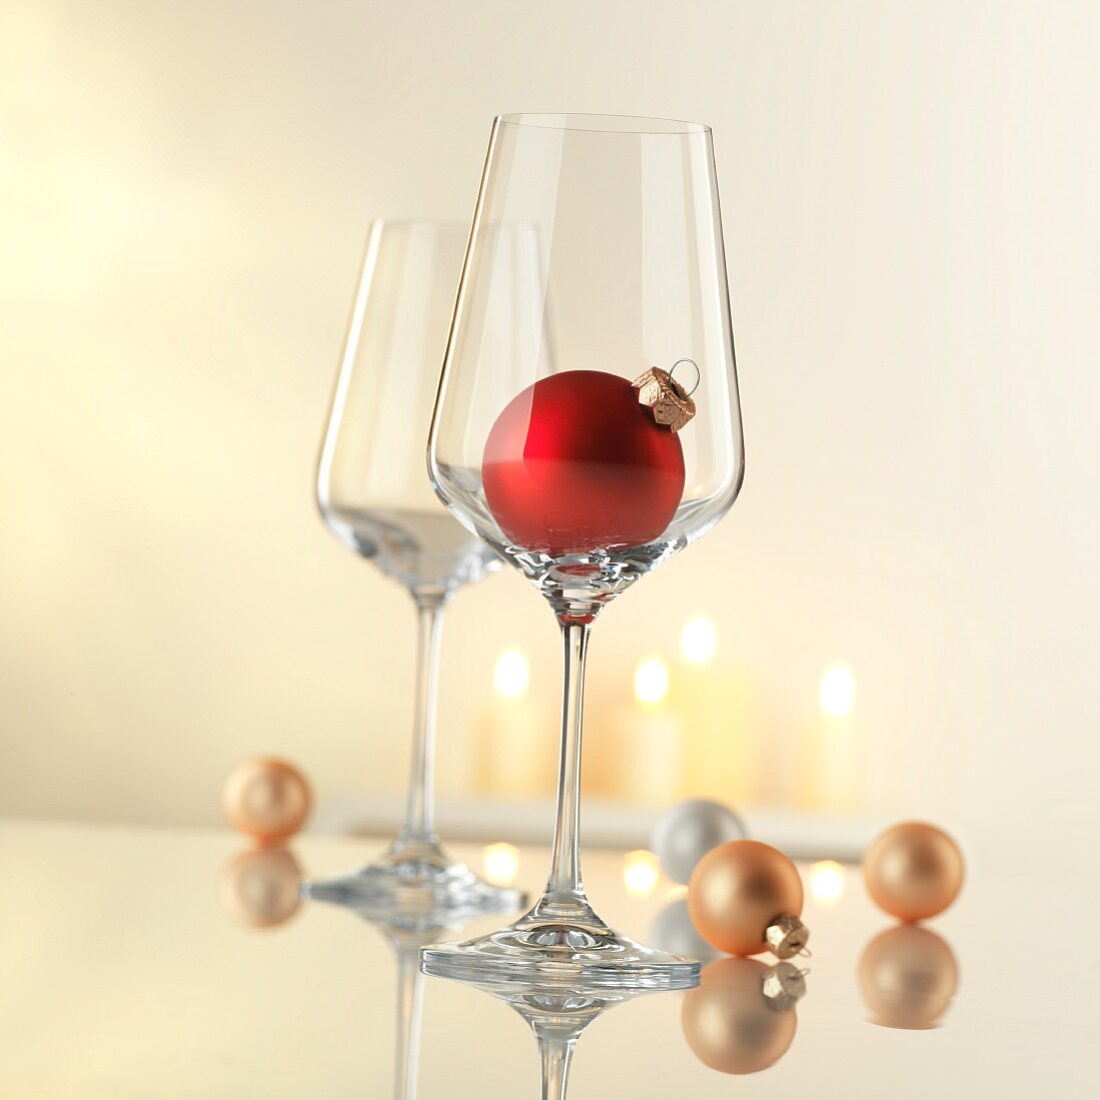 Wine glasses with Christmas decorations